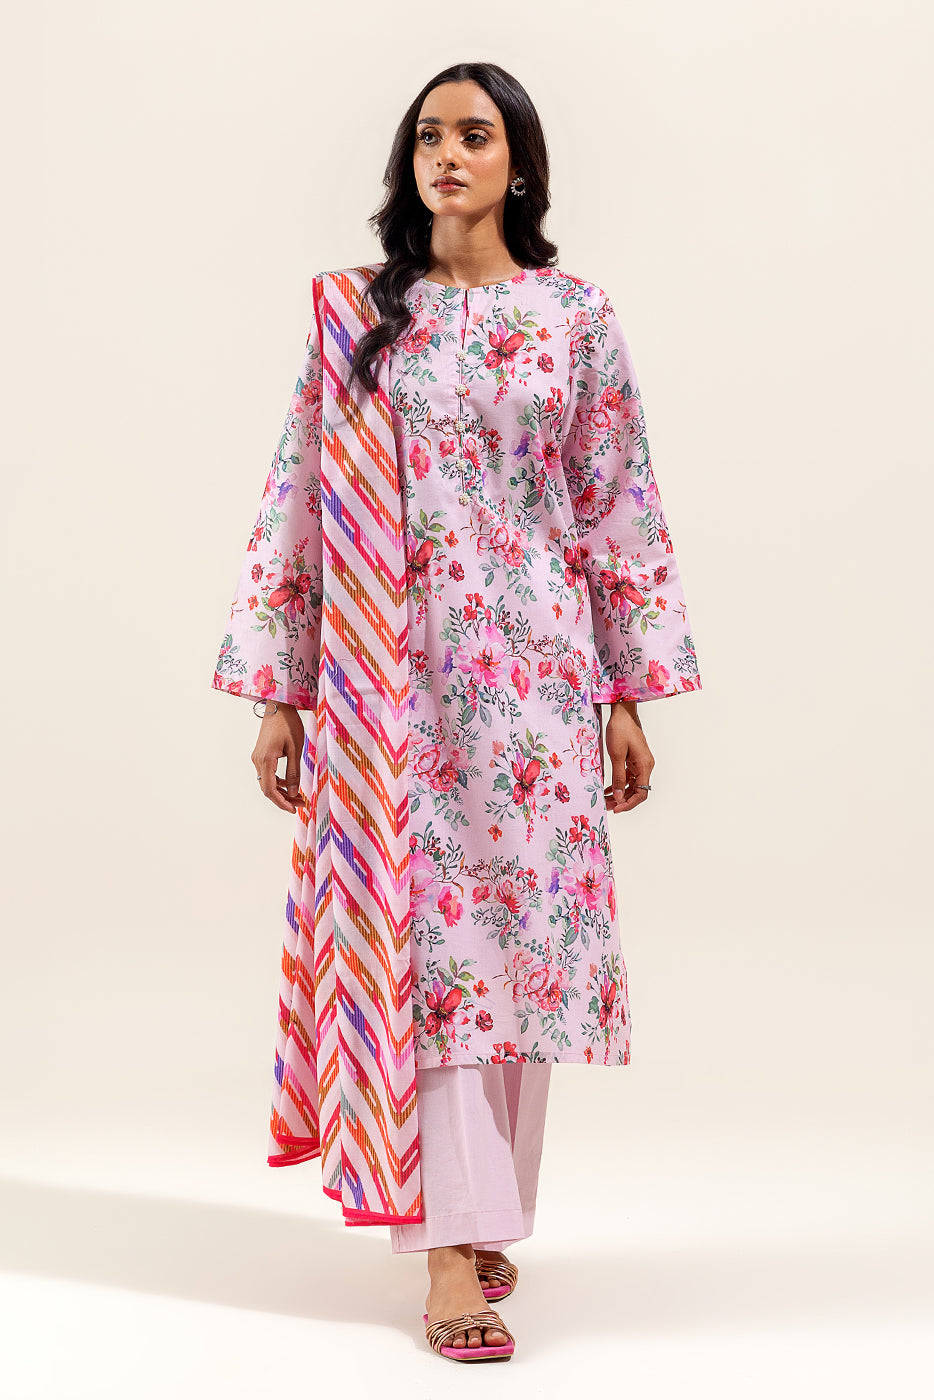 3 PIECE PRINTED SUIT-BLUSH ORCHARD (UNSTITCHED)